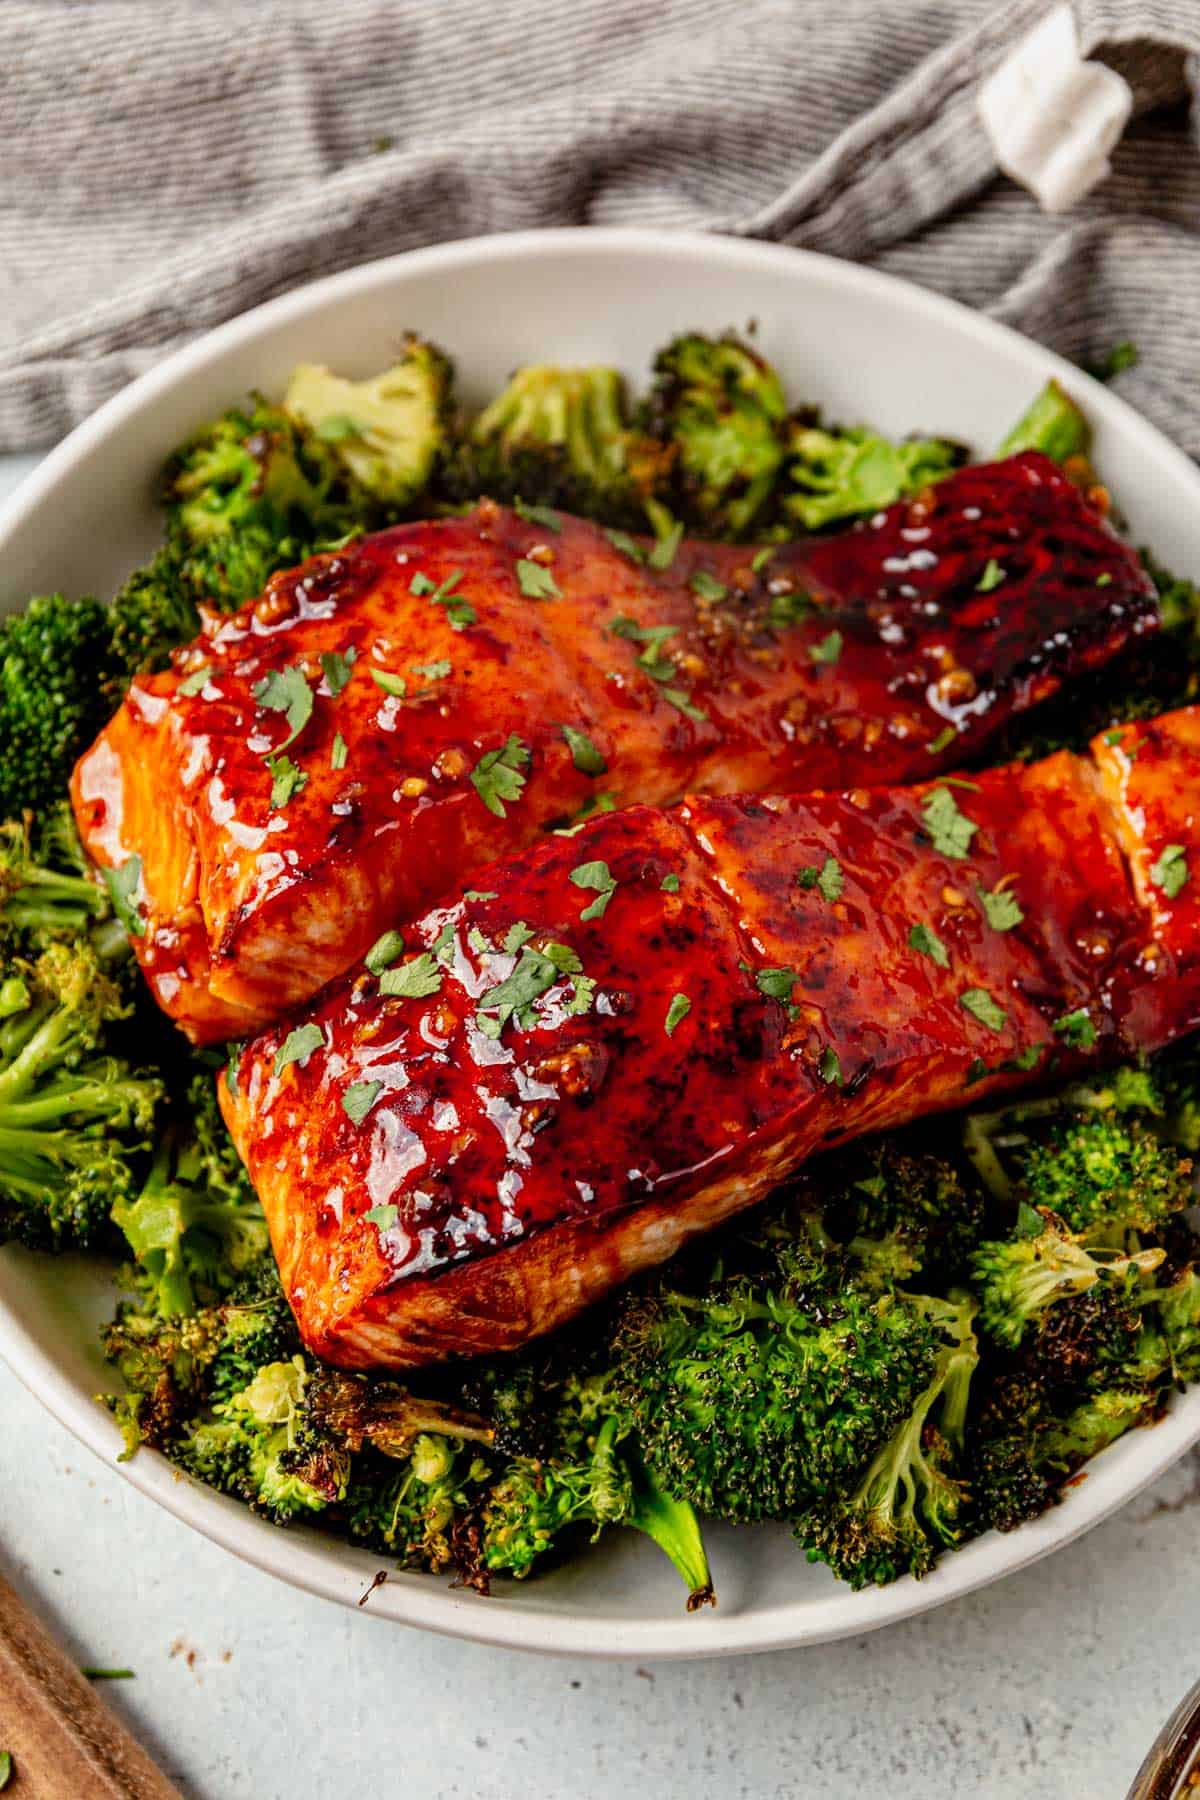 two pieces of honey glazed salmon with roasted broccoli on a plate